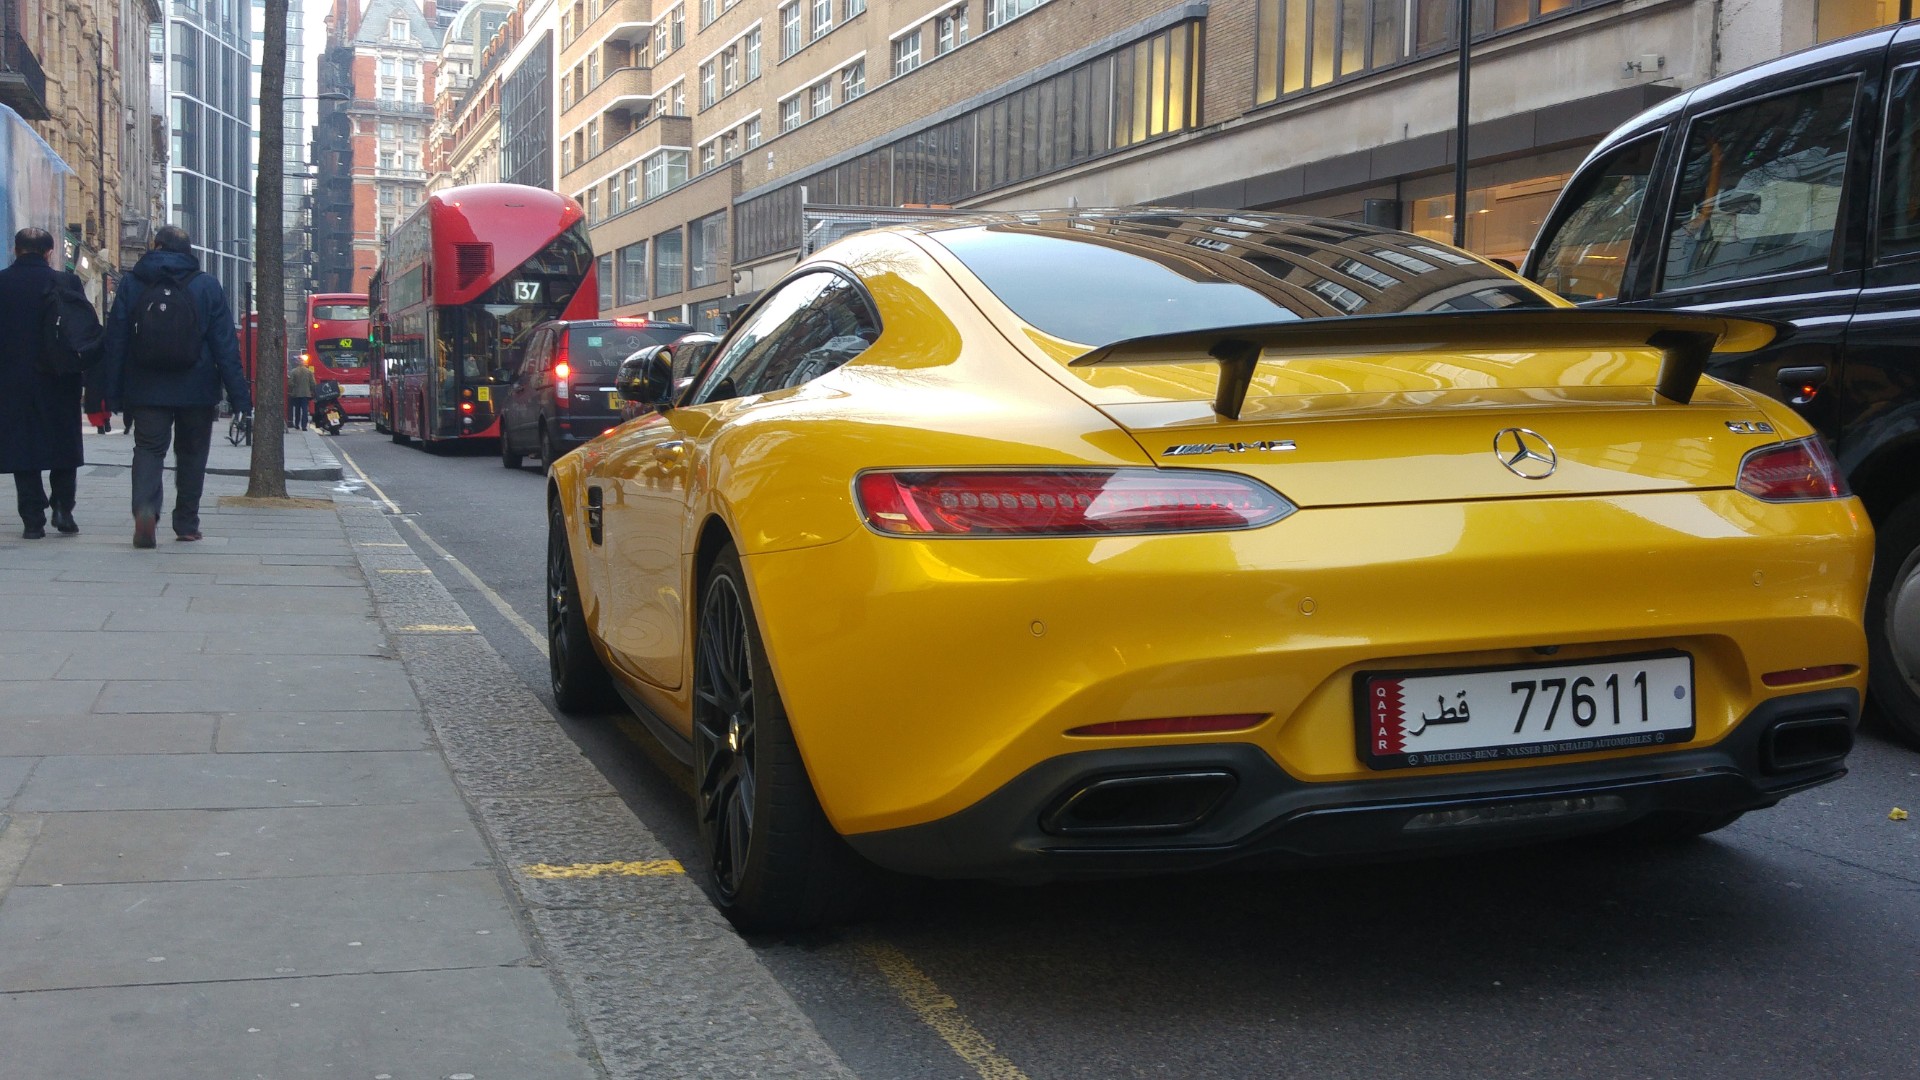 acoustic cameras to catch supercars in London